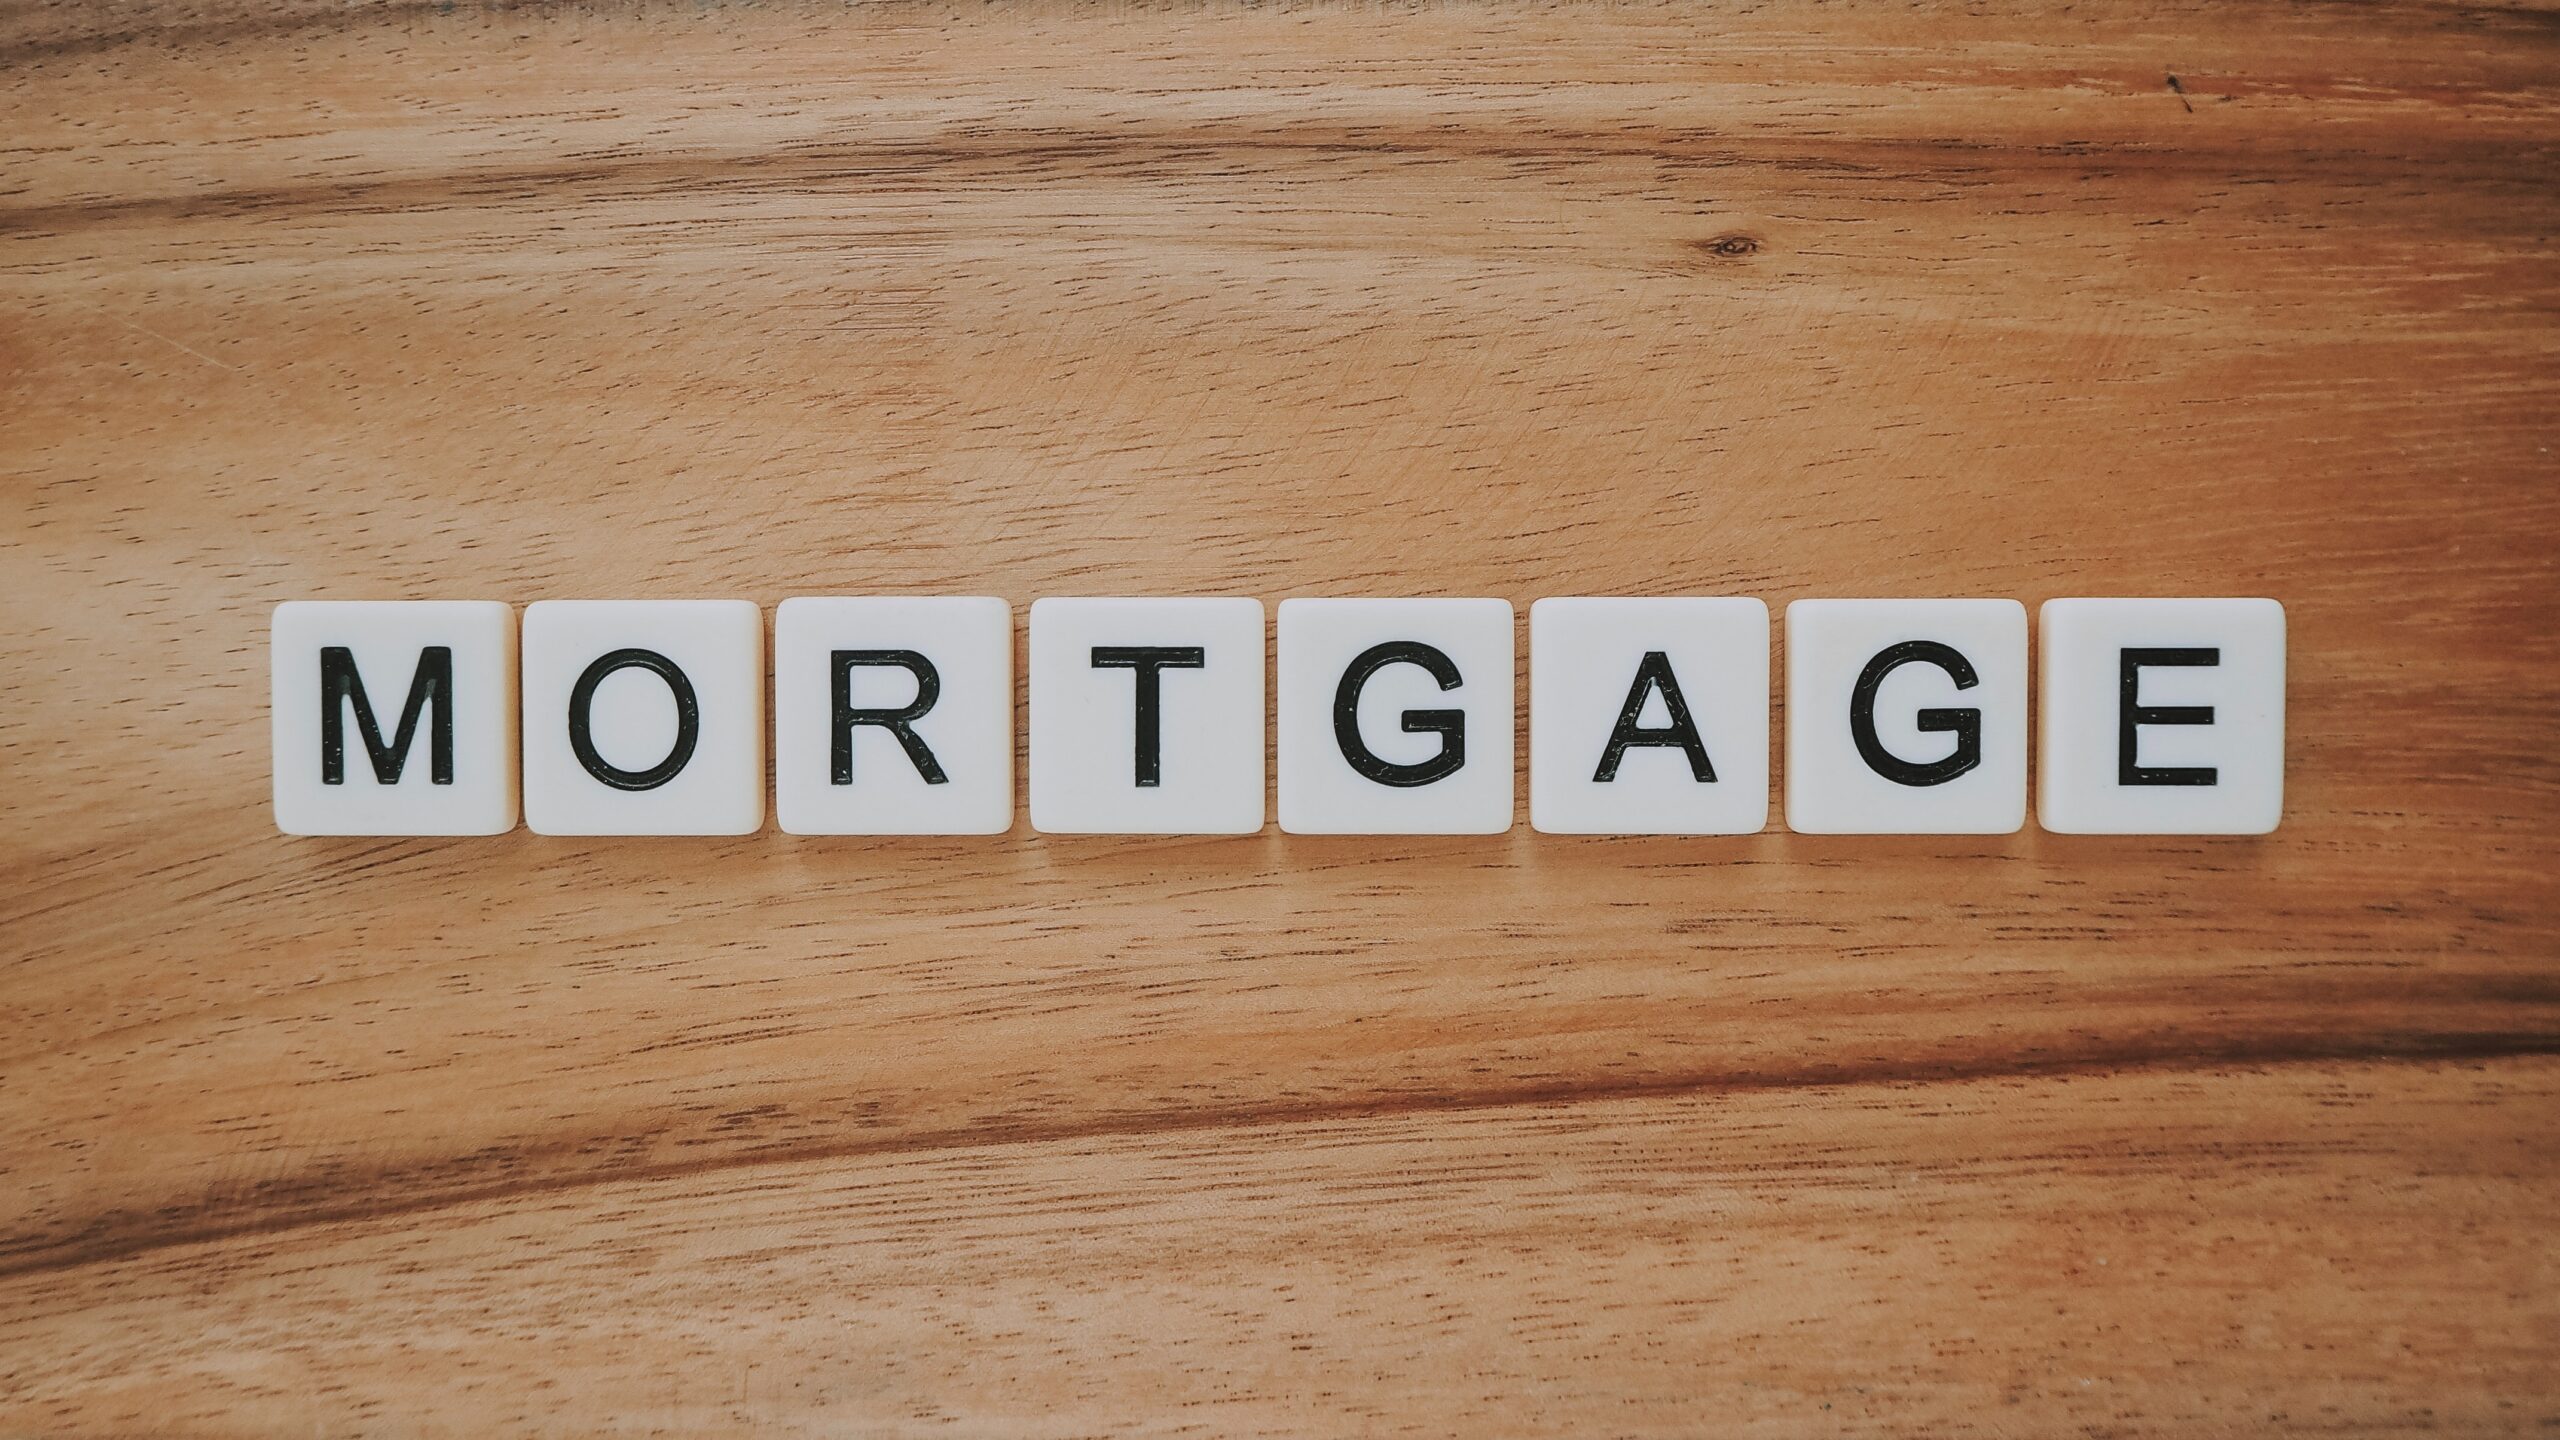 Everything You Need To Know About The New Mortgage Guarantee Scheme